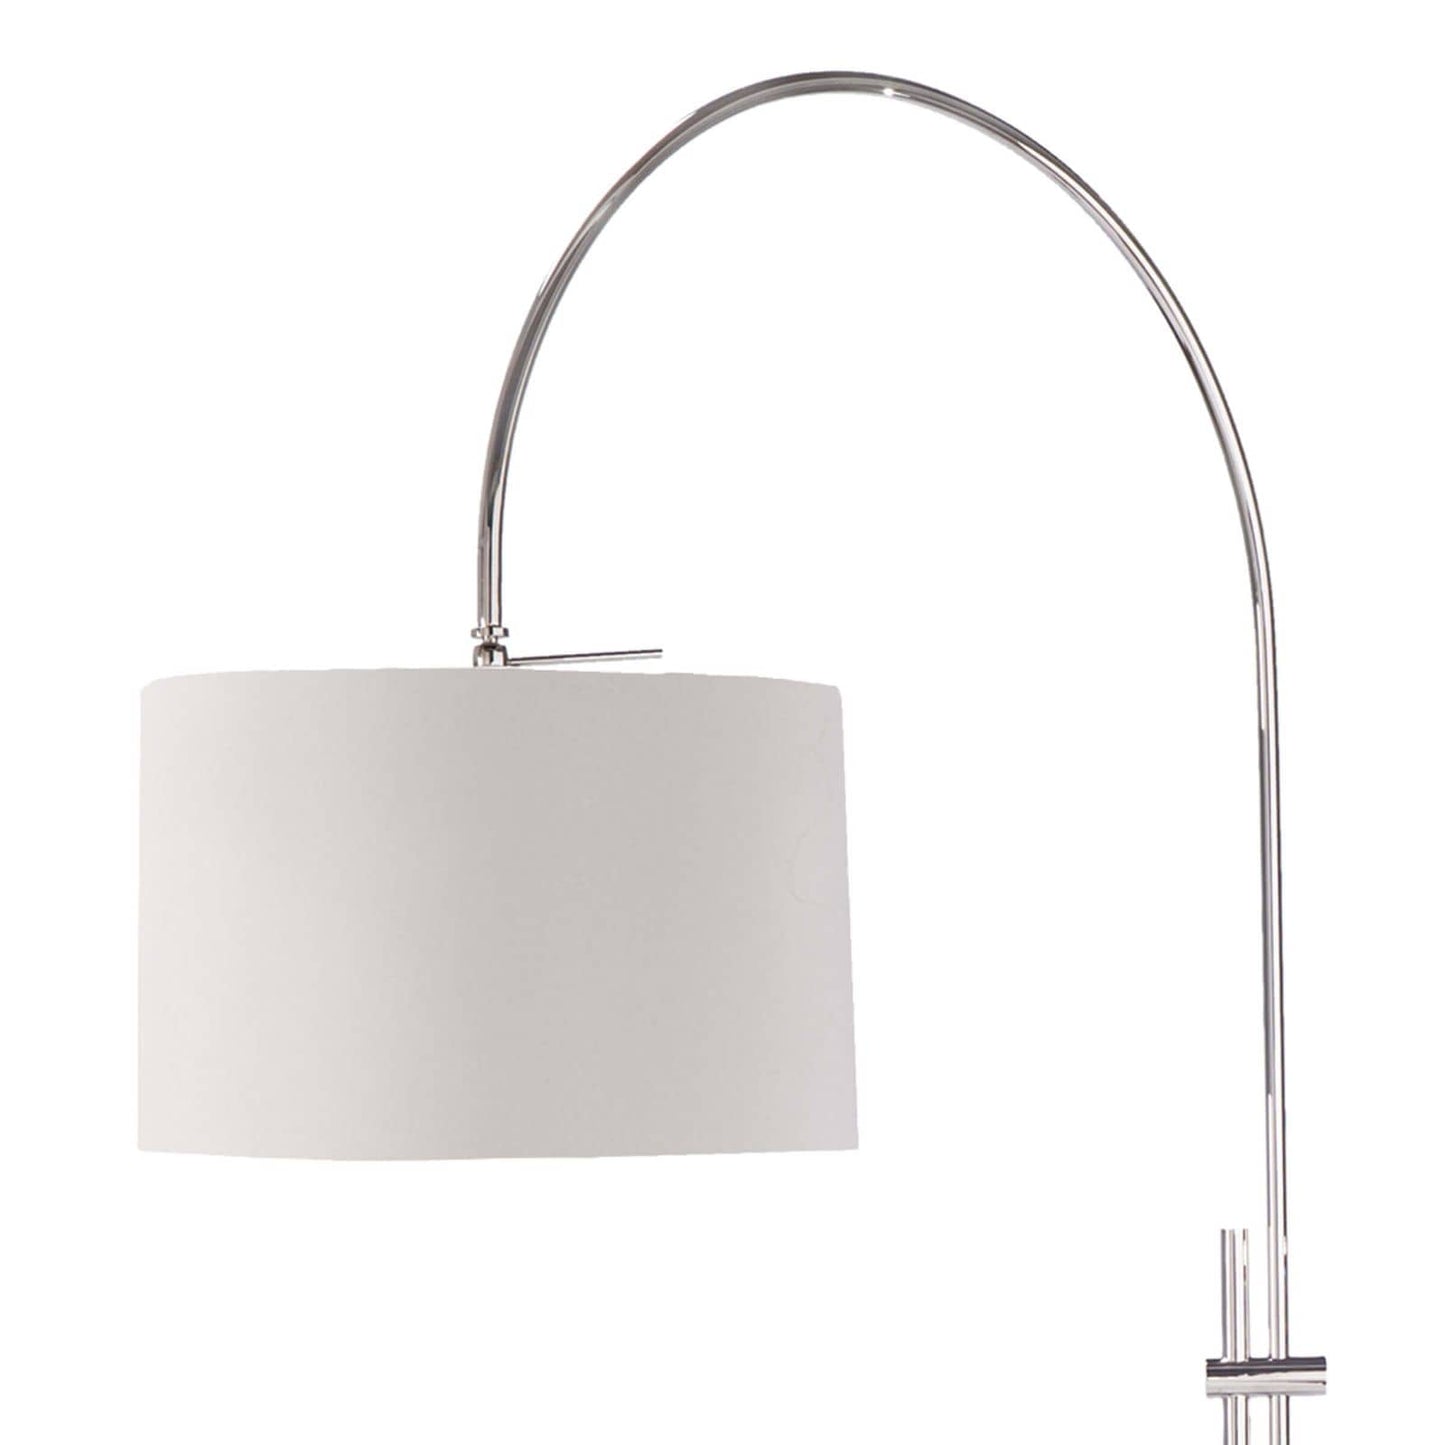 Regina Andrew Arc Floor Lamp With Fabric Shade in Polished Nickel